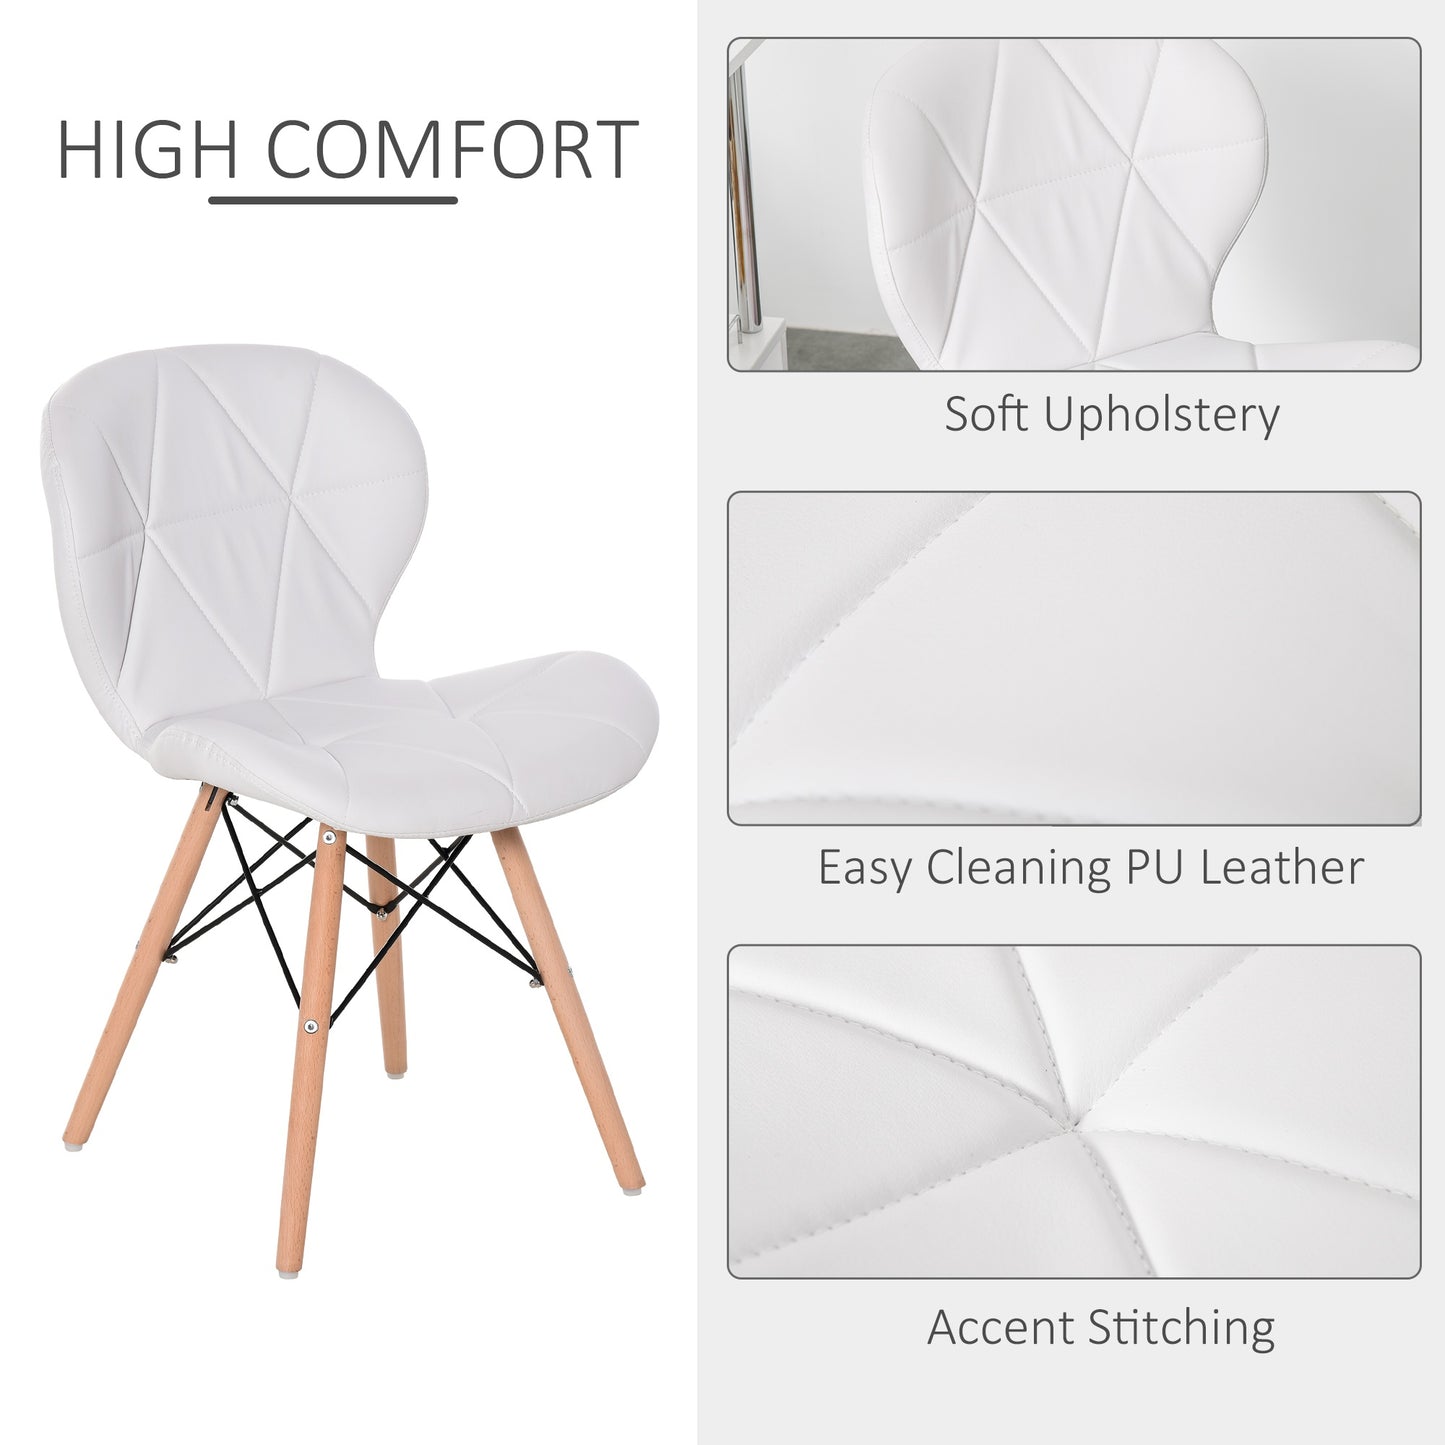 HOMCOM Armless Ergonomic Curved Dining Chair Accent Chair PU Leather Seat Wood Legs